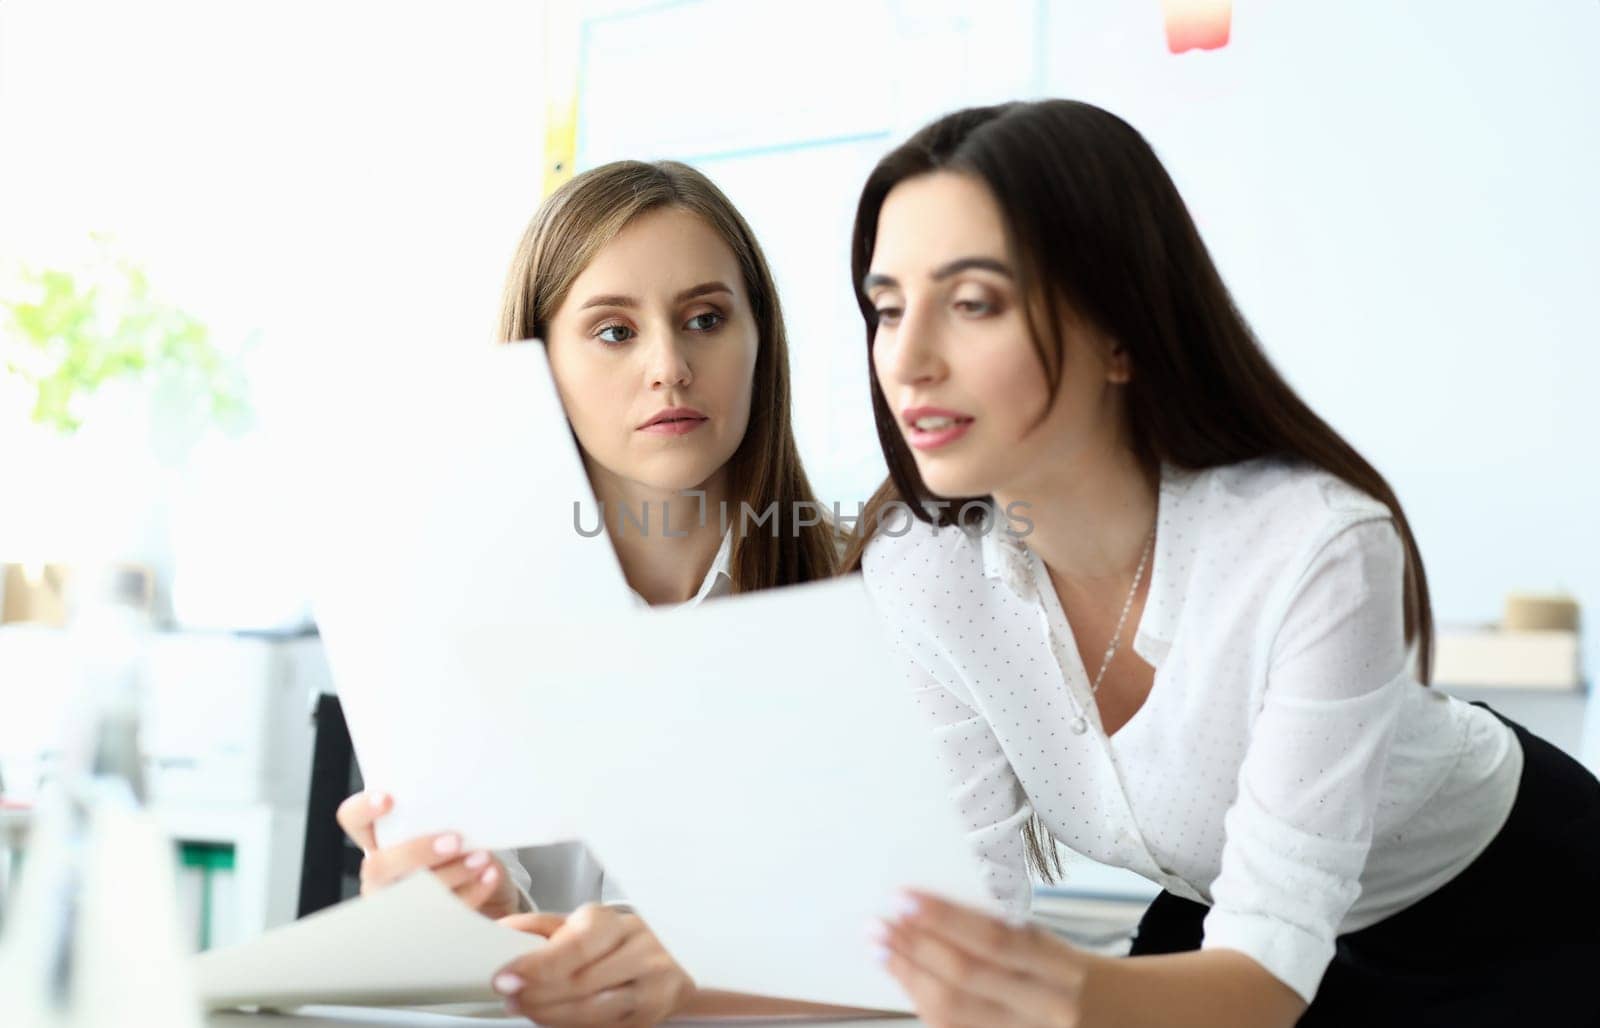 Portrait of smart businesswoman looking at important document with significant information about company profit and standing near concerned colleague. Accounting office concept